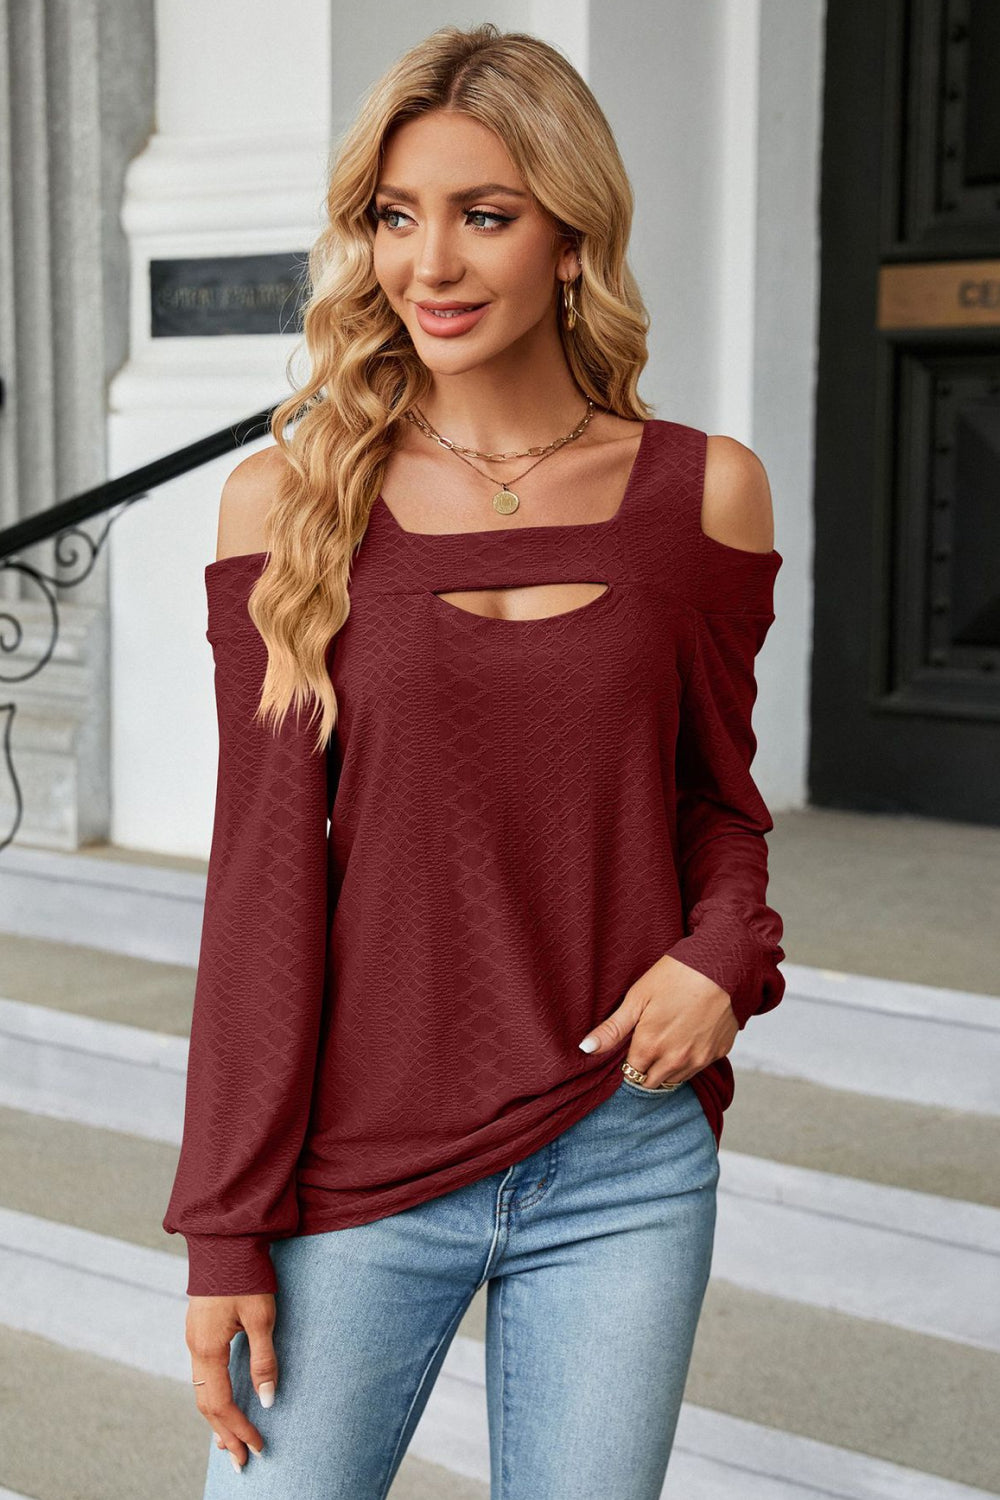 Cold Shoulder Square Neck Cutout Blouse - Red / S - Women’s Clothing & Accessories - Shirts & Tops - 16 - 2024